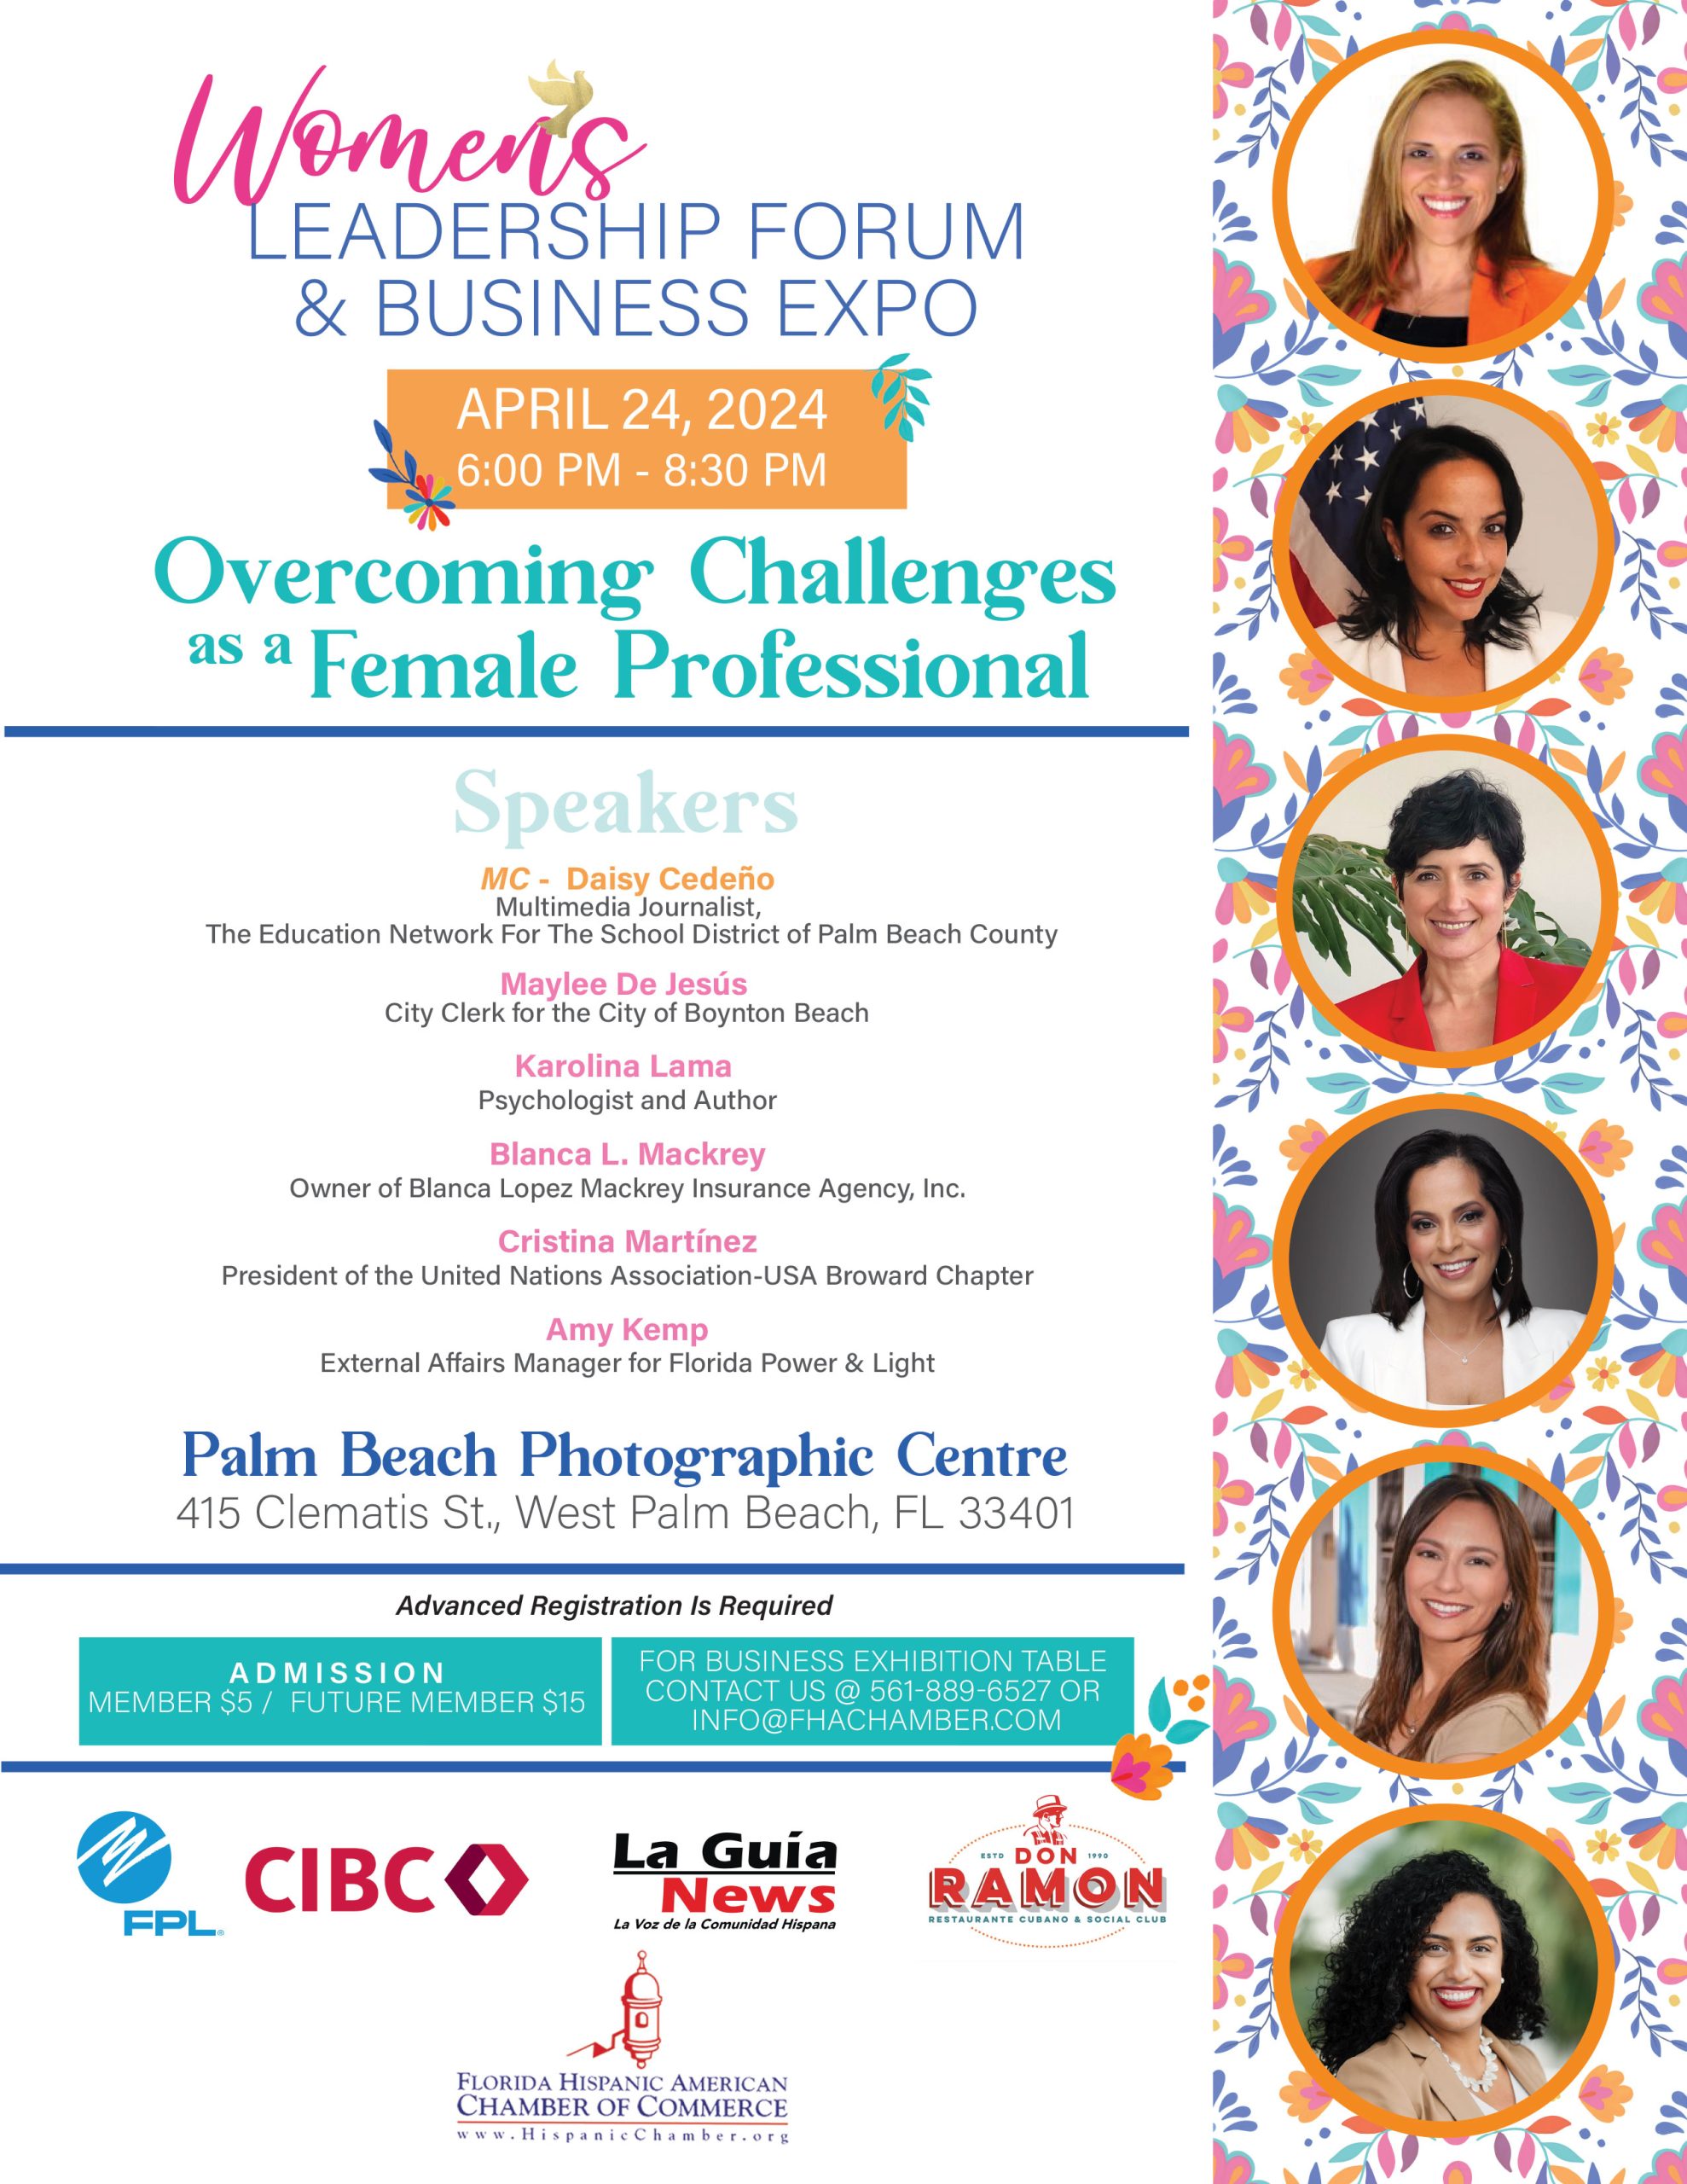 The Women’s Leadership Forum & Business Expo 2024